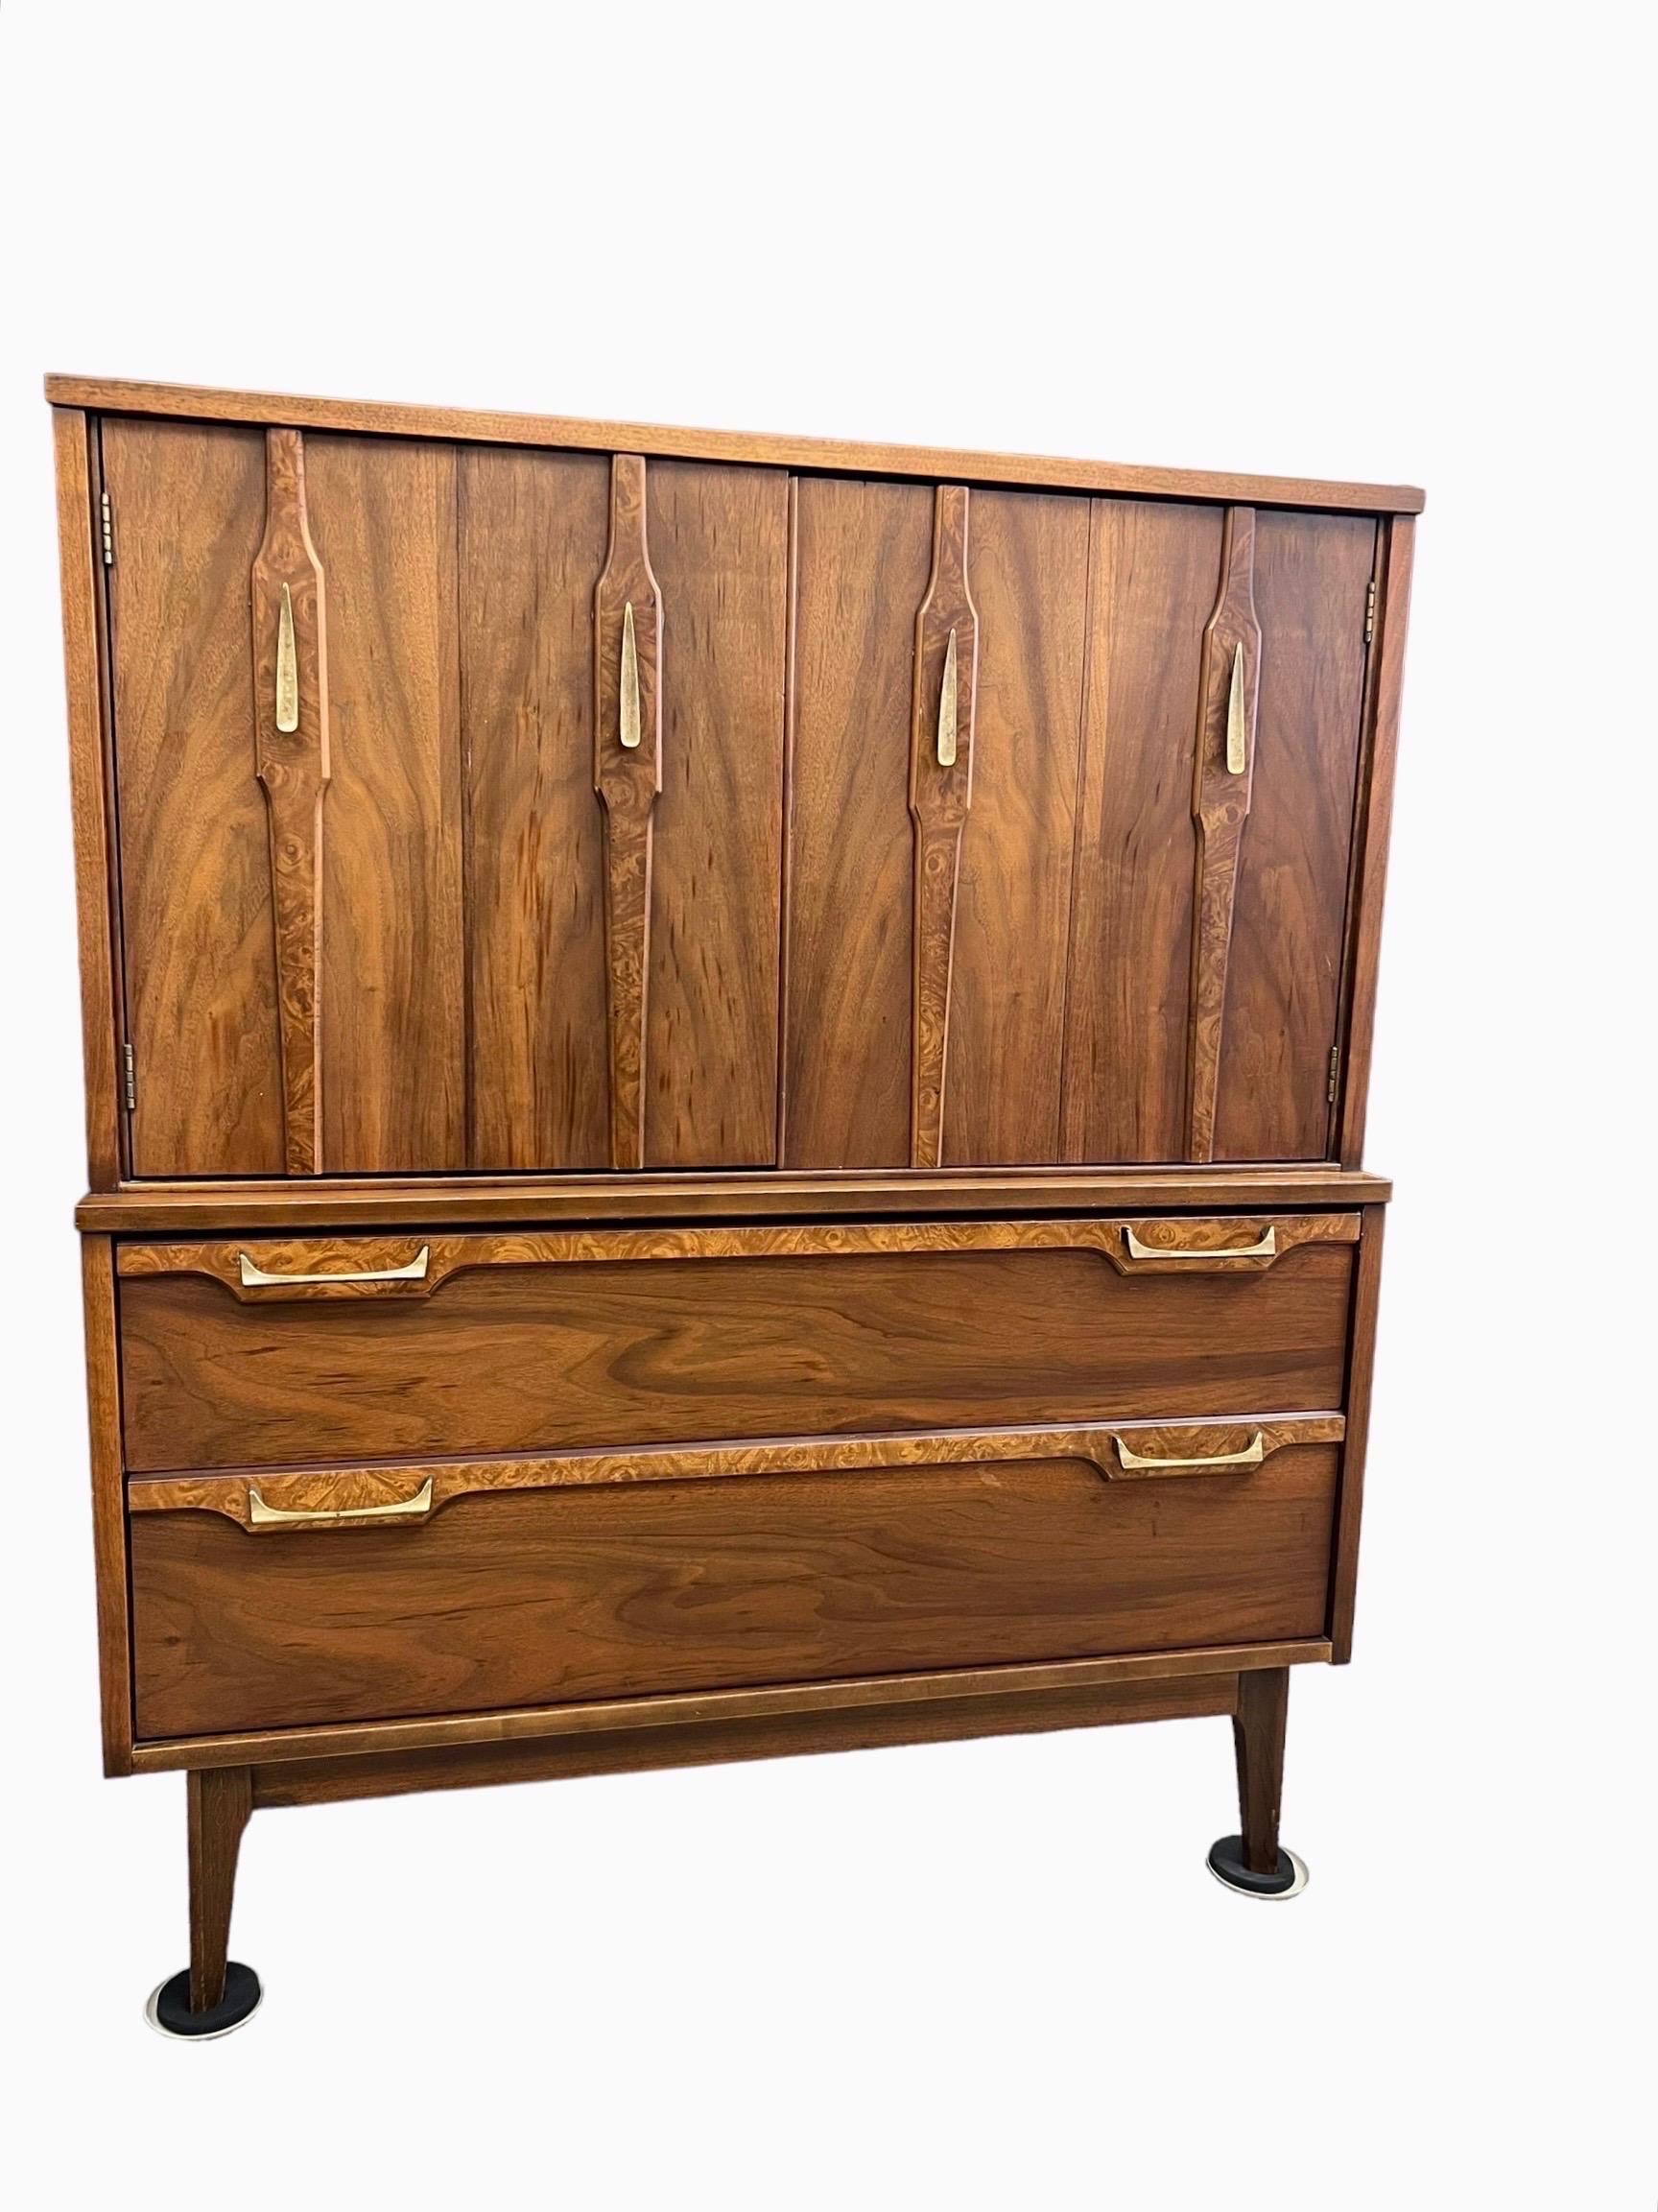 This Sophisticated, Tall Gentleman’s Chest is Finished in Walnut With Burl Accent. The Door and Dovetailed Drawers Features Sculptural Solid Brass Pulls. There are Three Additional Drawers Behind the Upper Doors.

Dimensions. 40 W ; 18 D ; 47 H